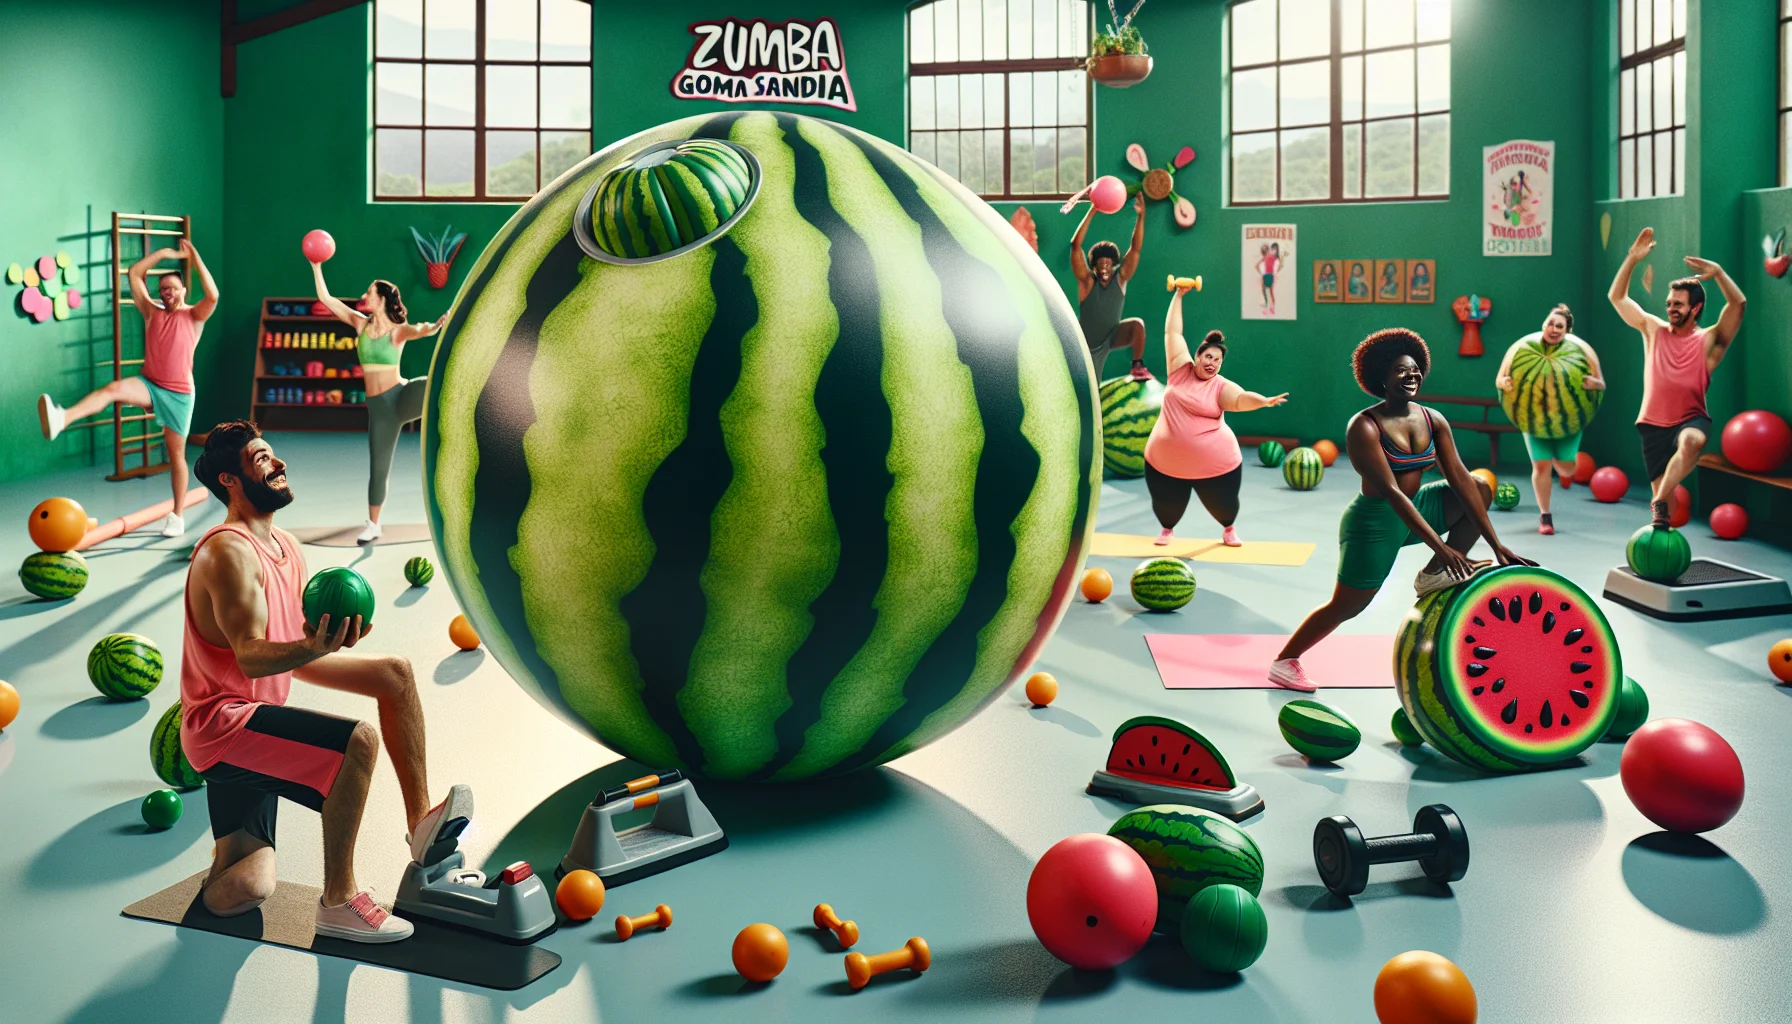 Craft a humorous scene to inspire people to work out, featuring a zumba goma sandia—a large, bright green watermelon bouncy ball—taking the center stage. Perhaps there is an array of fruit-themed exercise equipment around, with the watermelon ball incongruously being used for a myriad of unconventional exercises: think of it being juggled by a Caucasian man doing yoga poses, rolled like a bowling ball by a Black woman attempting to do push-ups, and even serving as a hurdle for a Hispanic man doing jumping jacks. The setting could be an eccentric, colorful gym, brimming with energy and positivity.